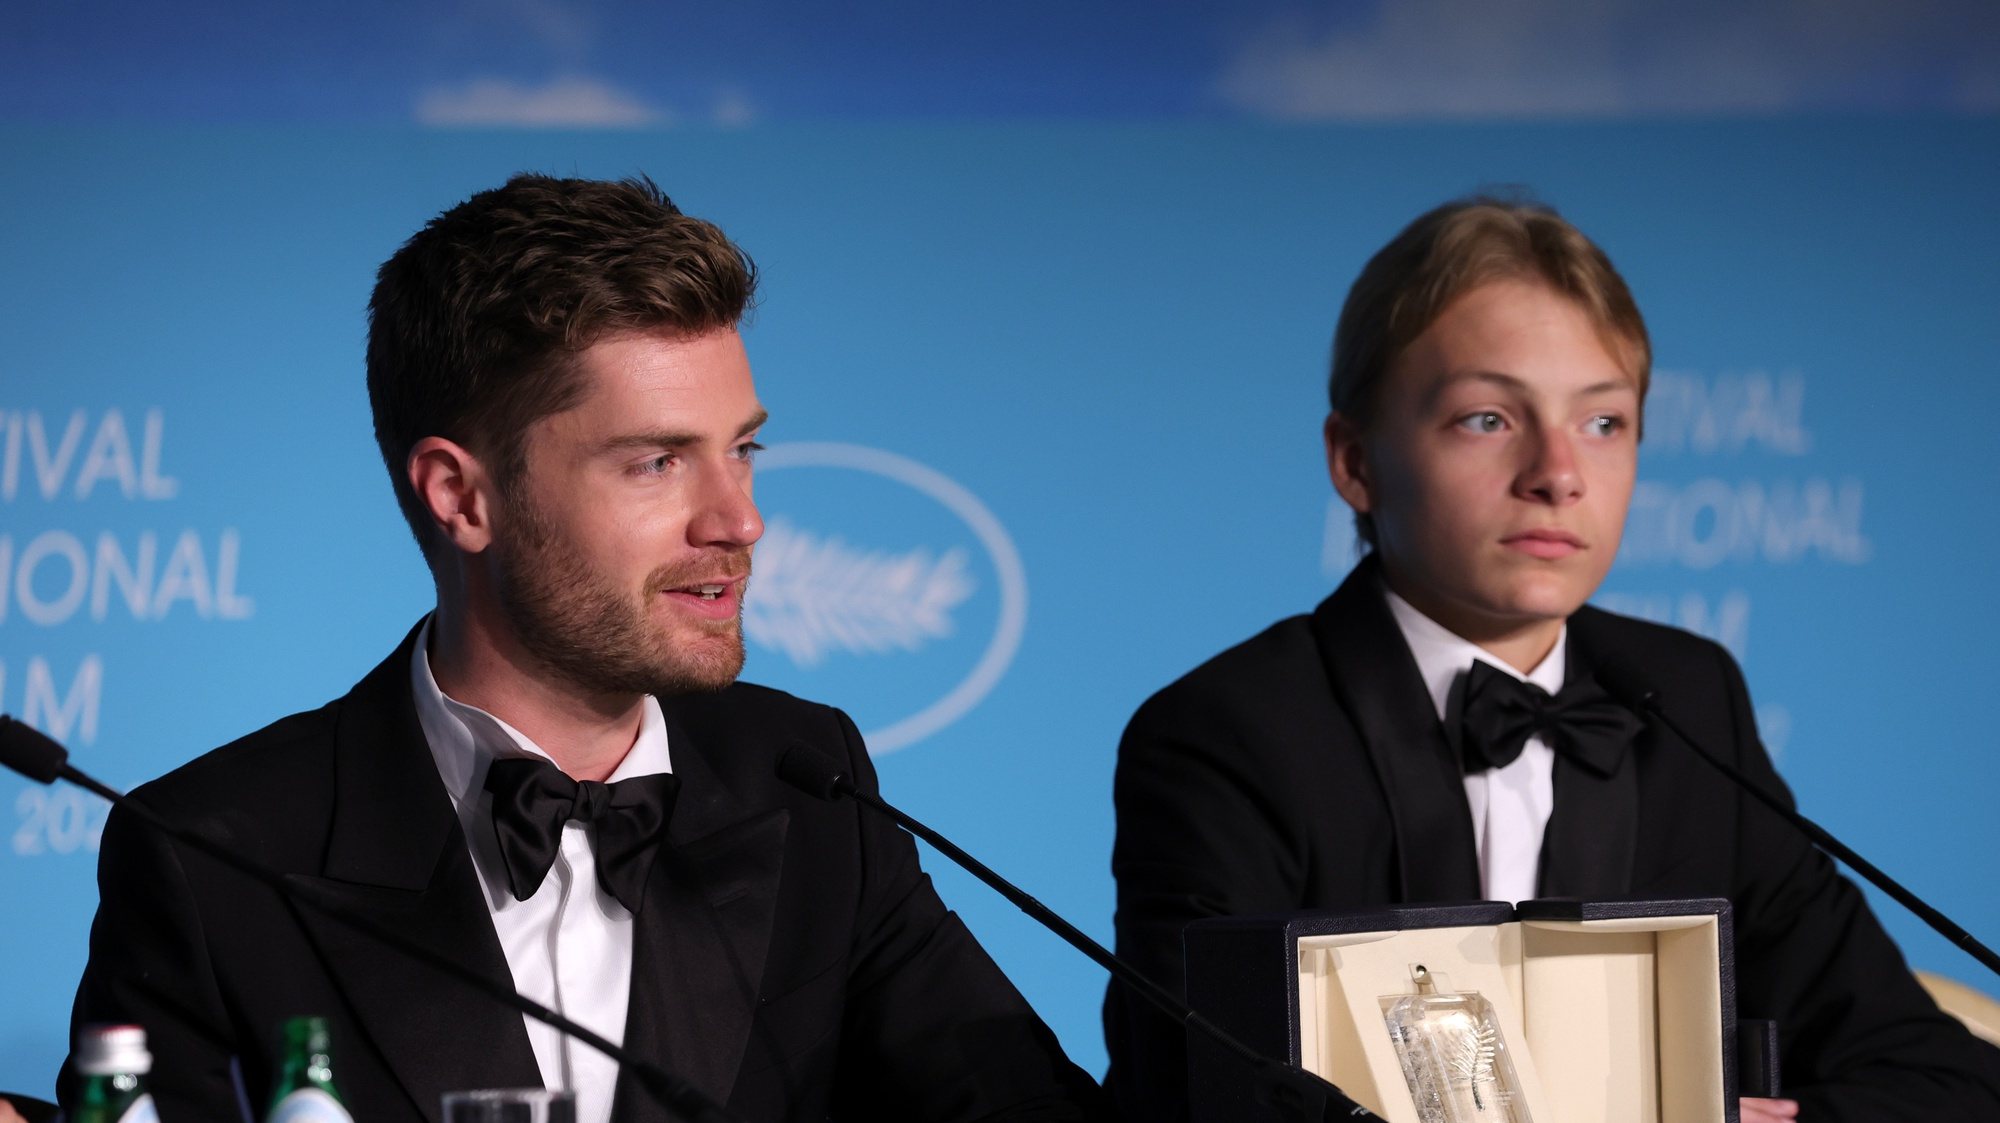 epa09983835 Director Lukas Dhont (L) and Eden Dambrine sit behind the Grand Prize Palme d&#039;Or Award for the movie &#039;Close&#039; at the Award Winners&#039; press conference within the Closing Ceremony of the 75th annual Cannes Film Festival, in Cannes, France, 28 May 2022  (issued 29 May 2022). The festival ran from 17 to 28 May.  EPA/JOHN PHILIPS / POOL *** Local Caption *** CANNES, FRANCE - MAY 28: &lt;&lt;enter caption here&gt;&gt; attends the Palme D&#039;or winner press conference during the 75th annual Cannes film festival at Palais des Festivals on May 28, 2022 in Cannes, France. (Photo by John Phillips/Getty Images)